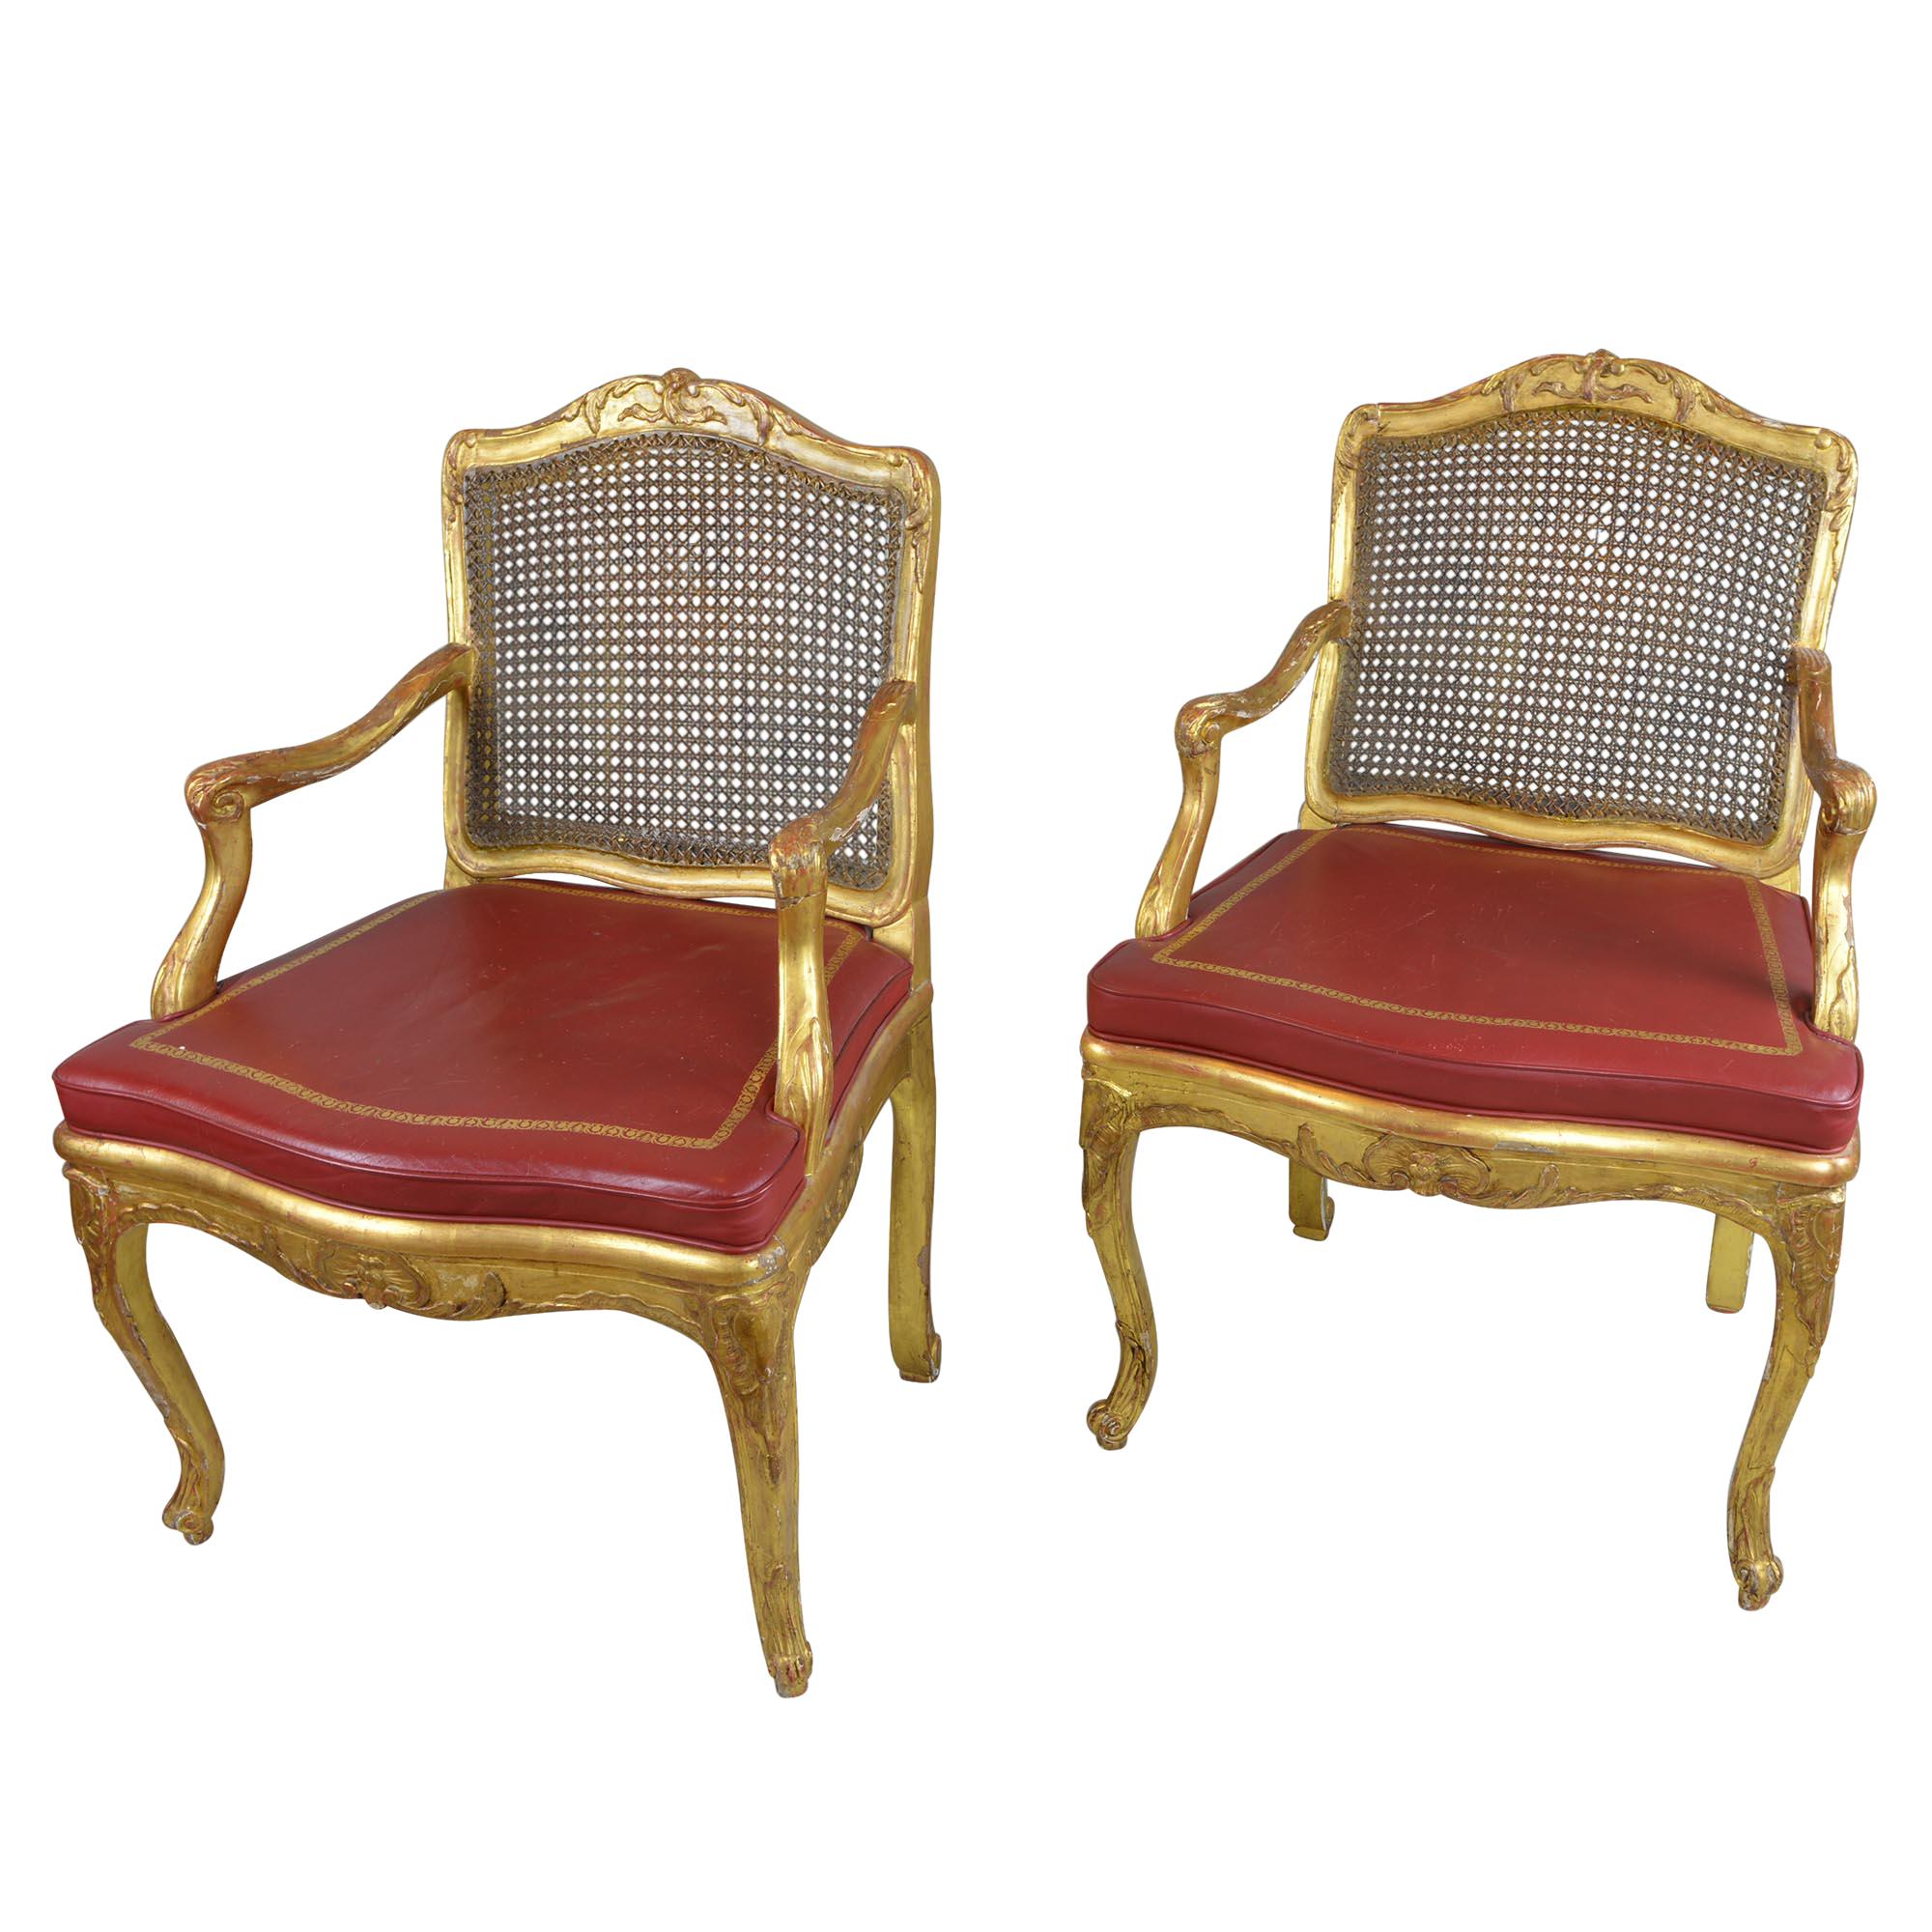 Pair of Antique Gilded Wood Regency Chairs with Red Leather Cushions For Sale 2